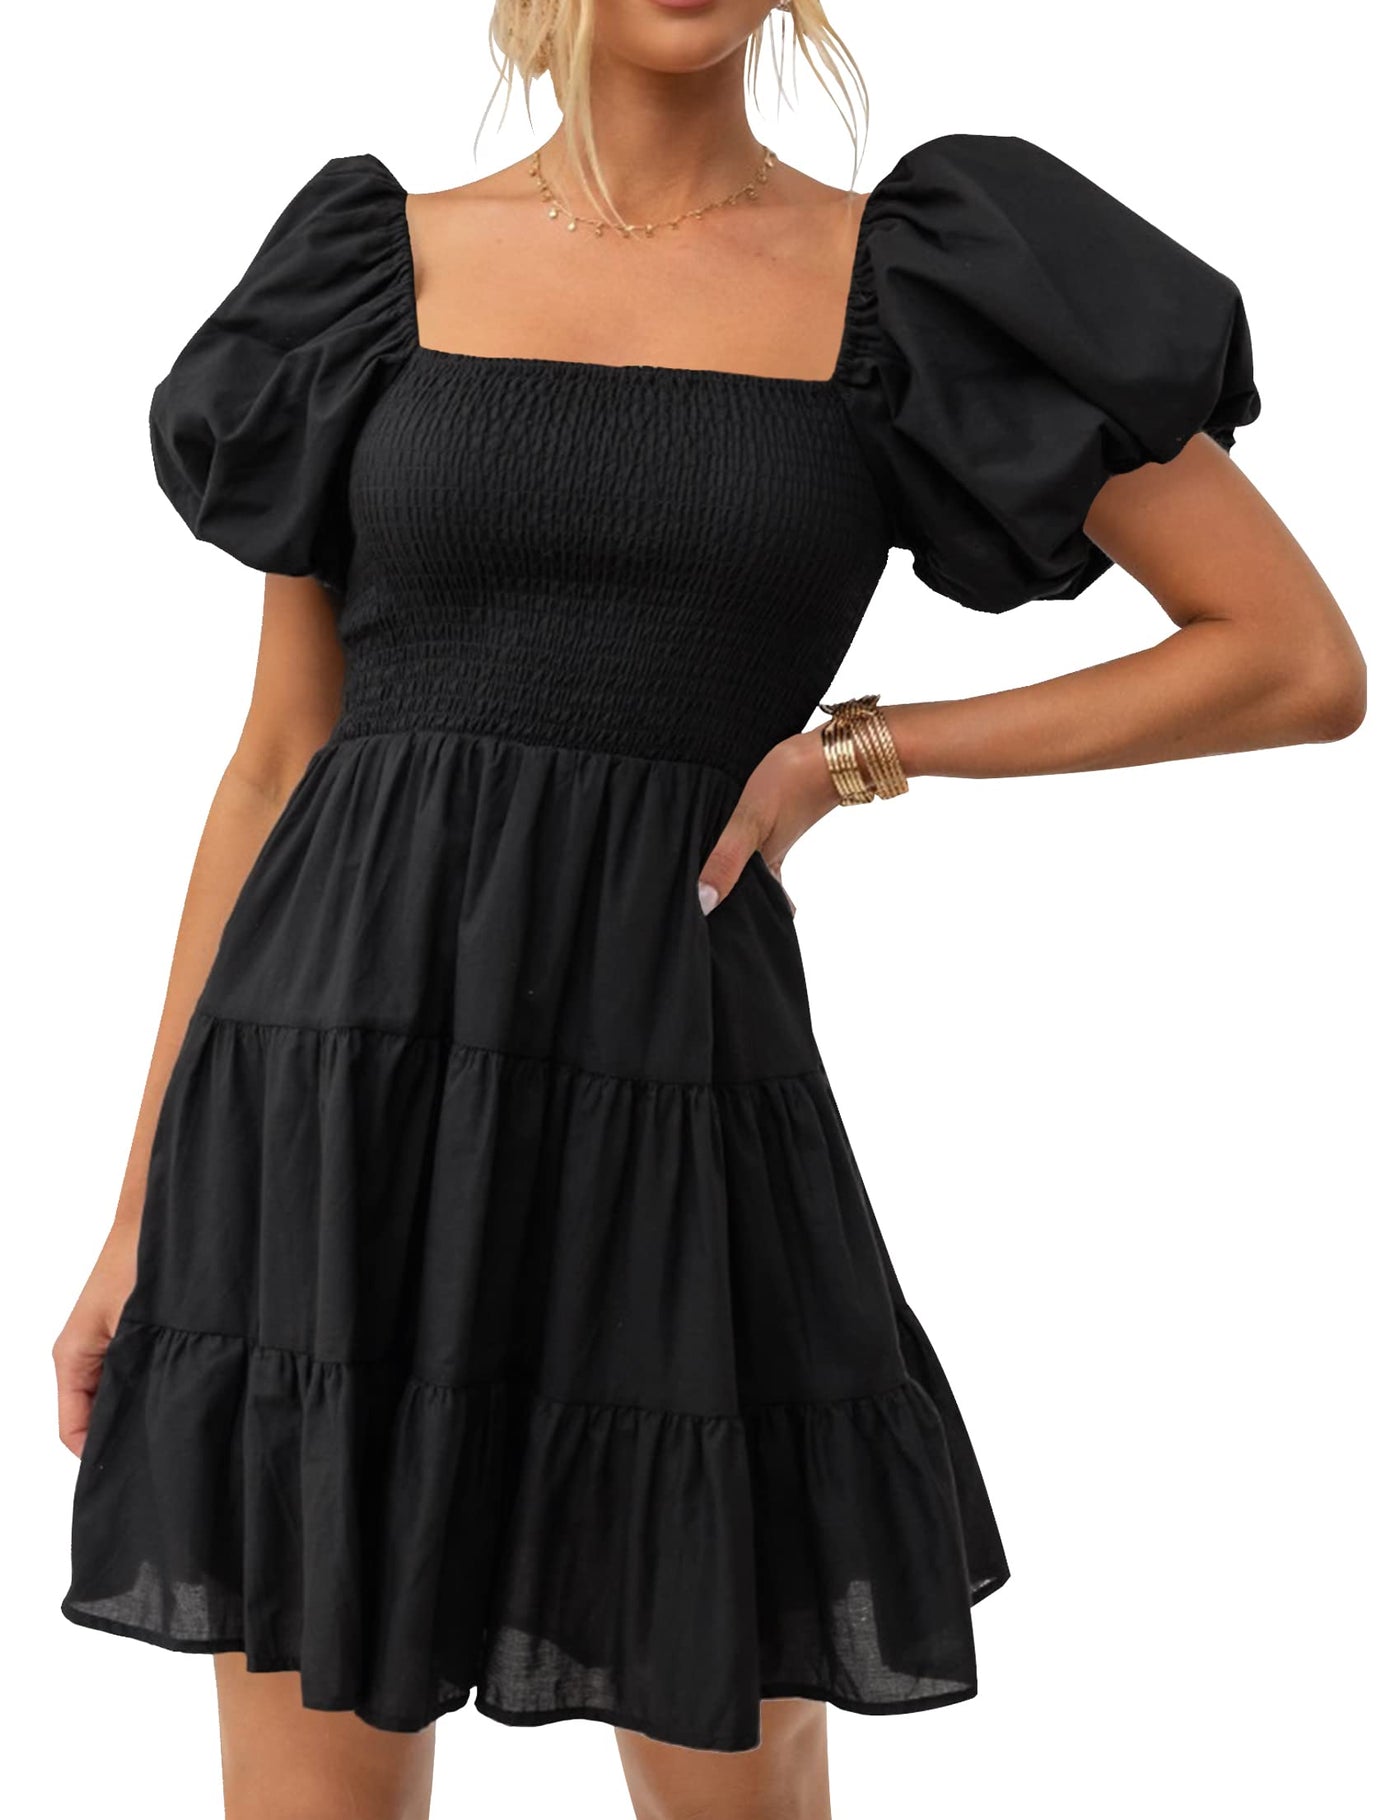 ALSLIAO Womens Square Neck Off Shoulder Dress A-Line Casual Dress Smocked  Puff Sleeve Black S 